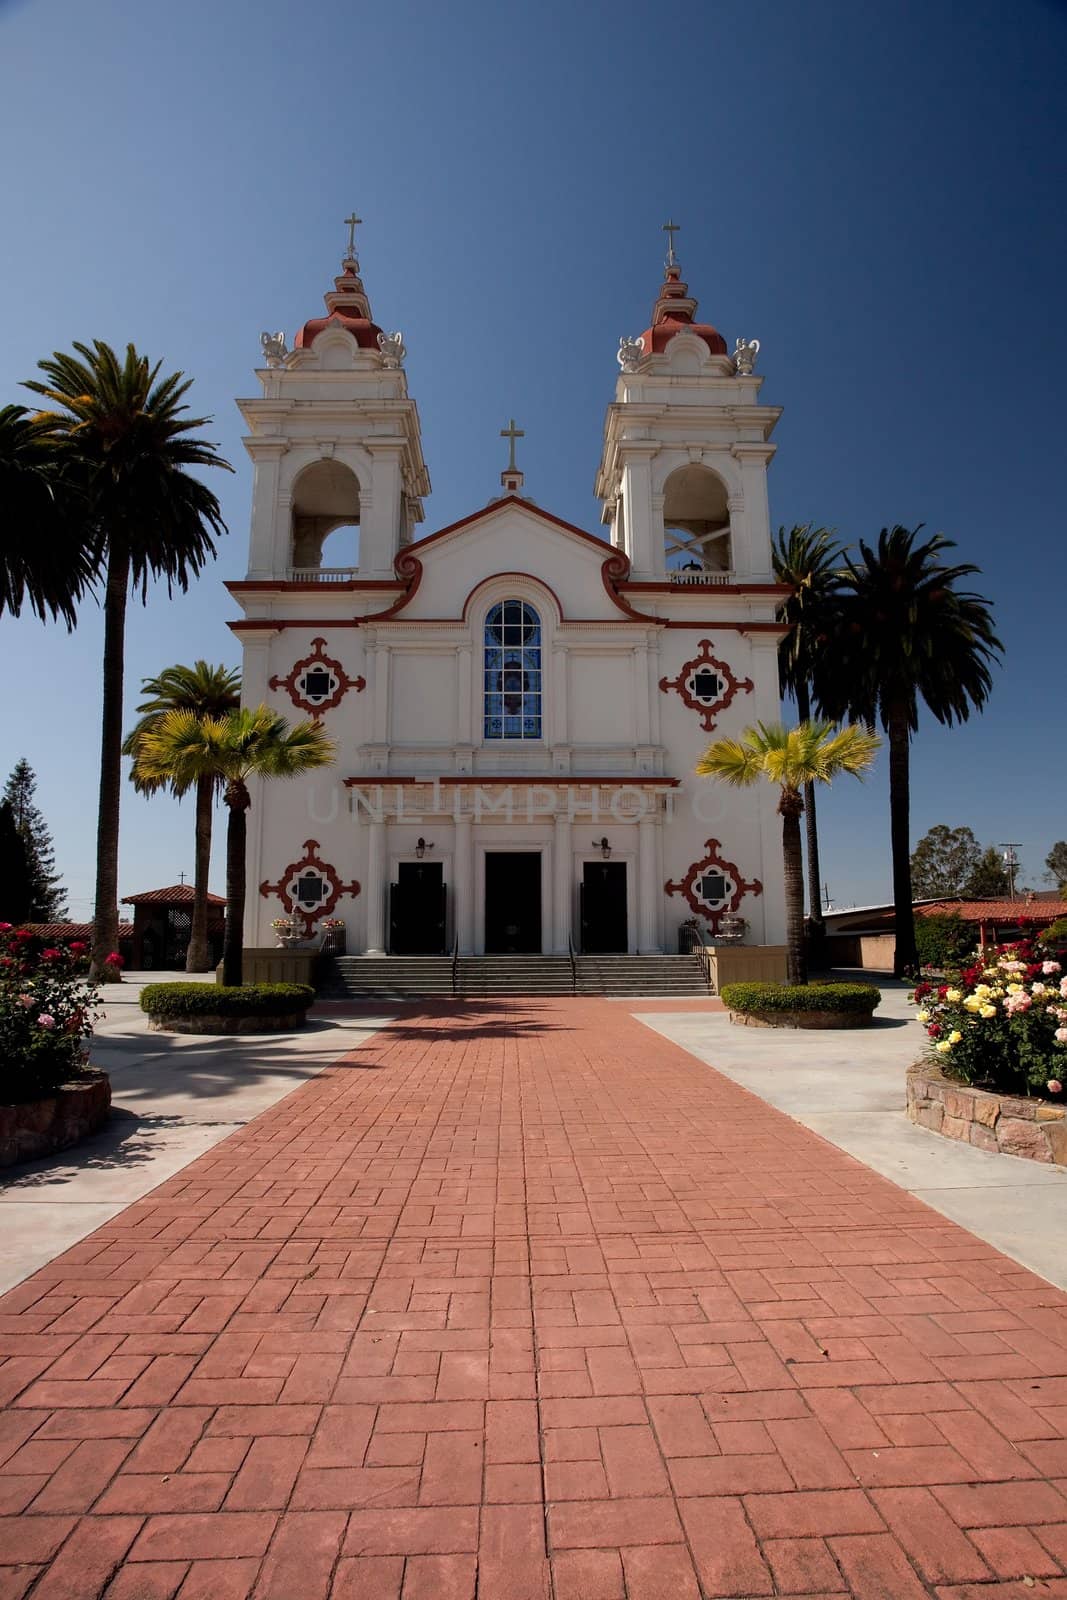 The Five Wounds Portuguese National Church is the heart and soul of the Portuguese Community in Santa Clara Valley. The Five Wounds Parish was dedicated by Father Henrique Ribeiro on November 8, 1914.